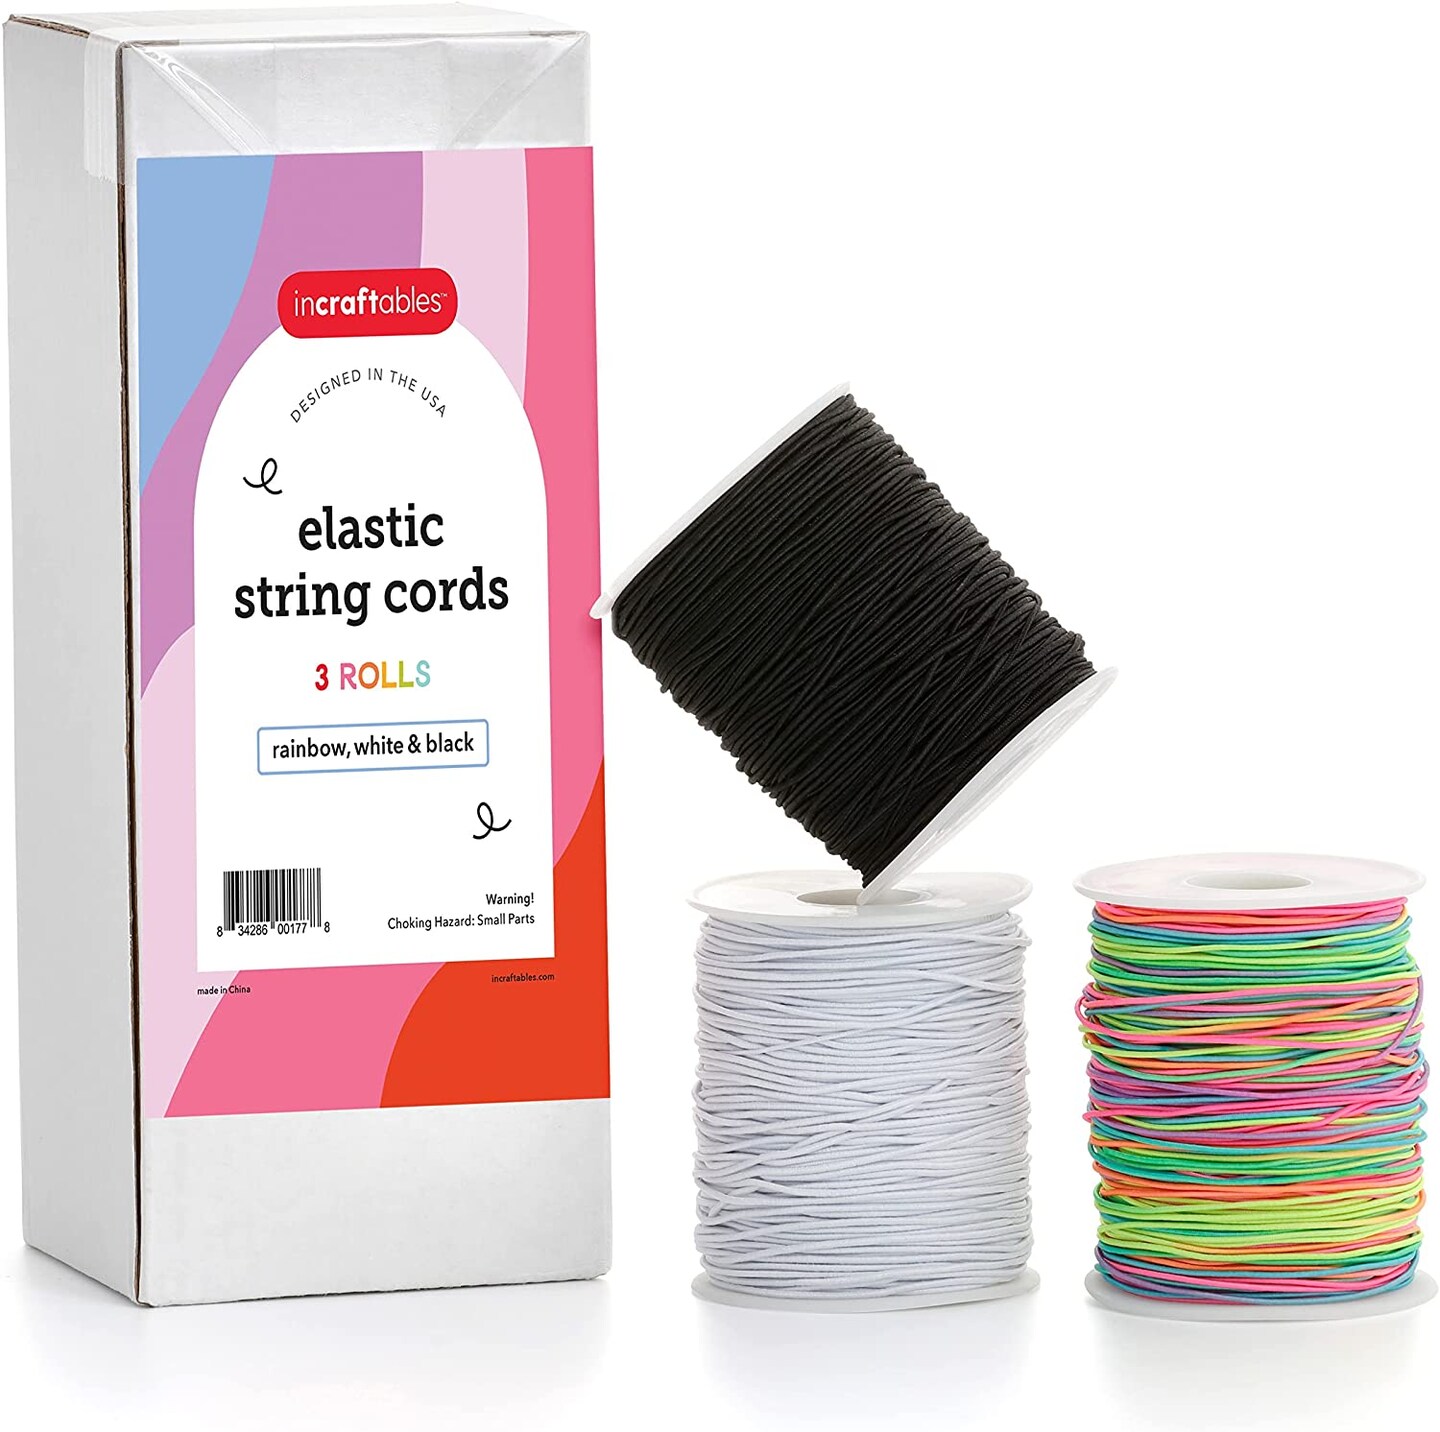 Incraftables Elastic String Cord Set of 3 Rolls (White, Black &#x26; Rainbow). Best 1mm Thick Stretchy Cording Set for DIY Bracelet, Jewelry, Necklace &#x26; Bead Making (Each Roll - 100 meters / 328 feet Long)